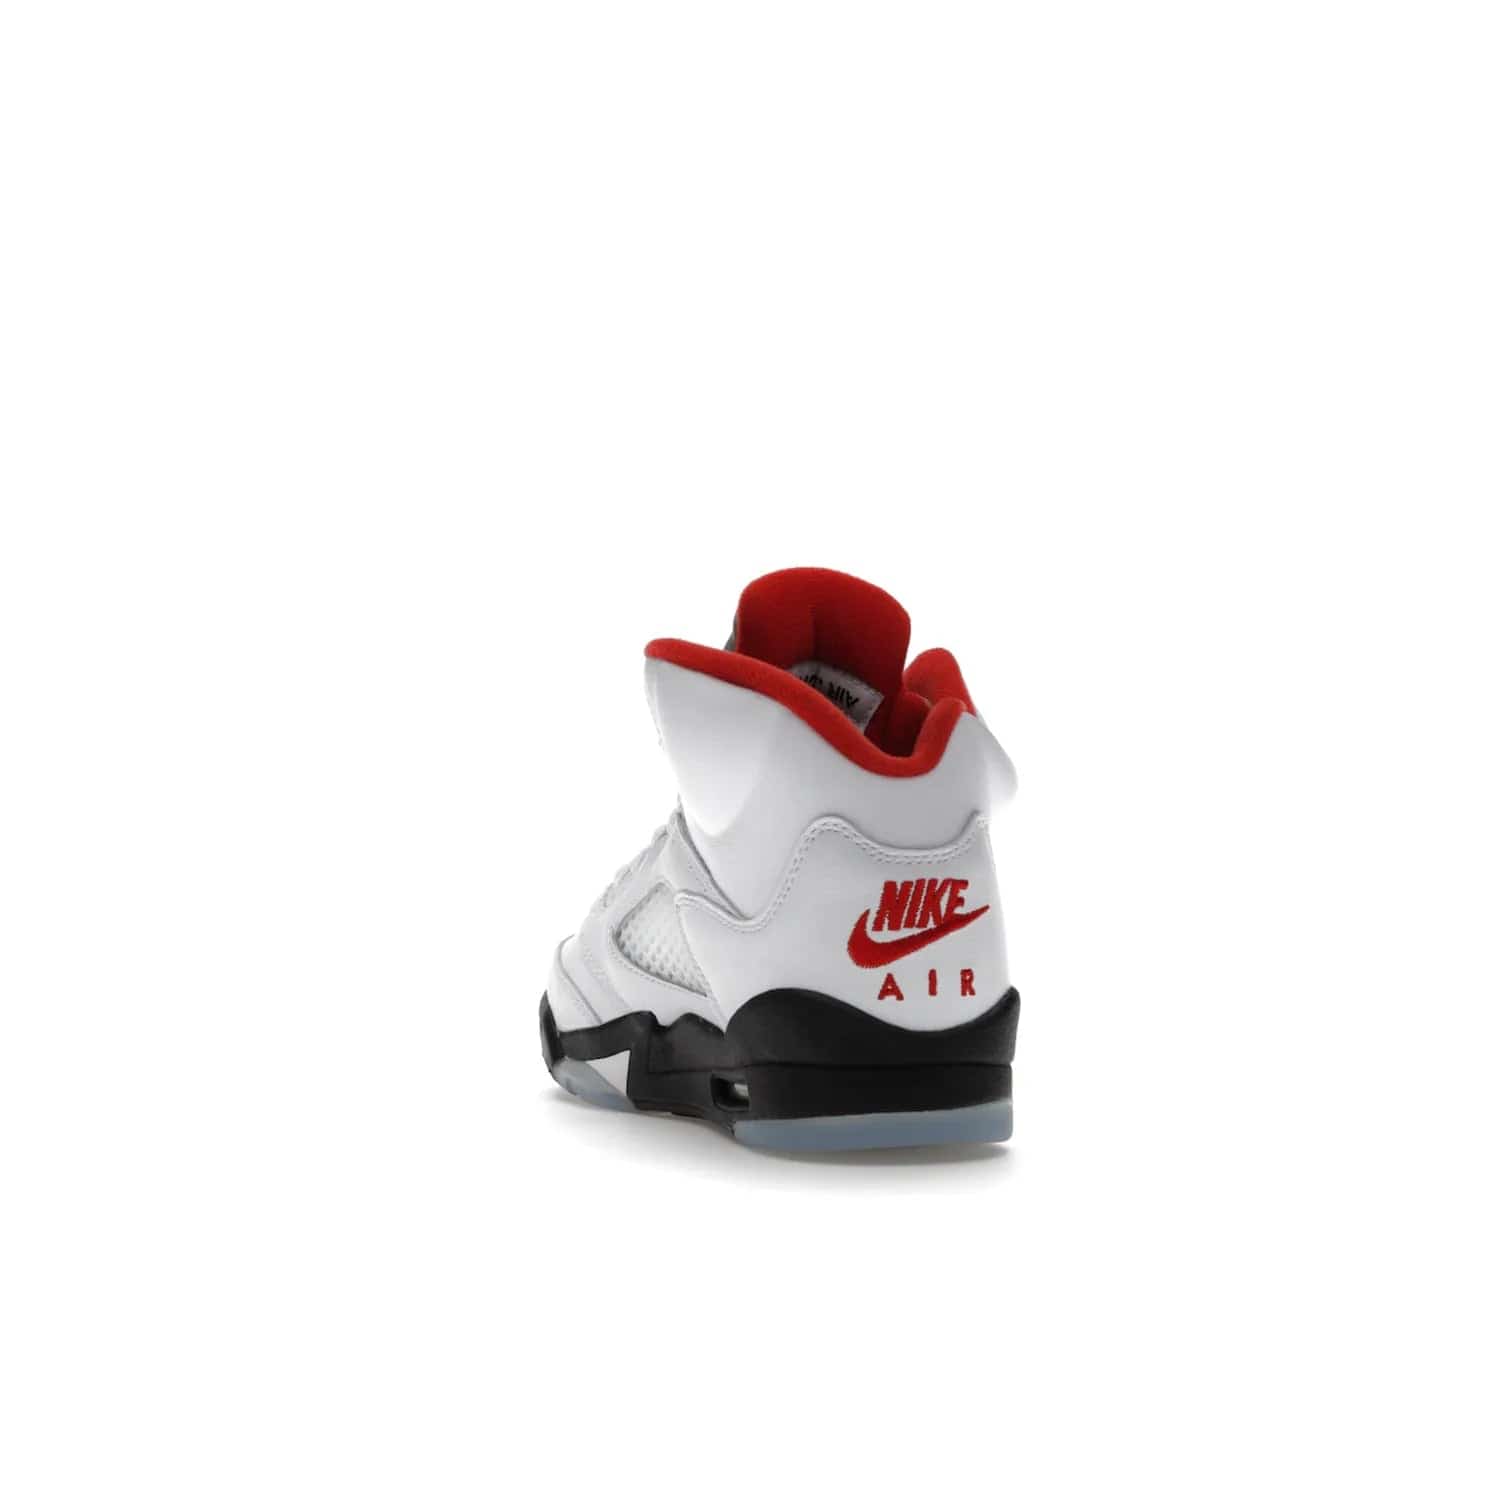 Jordan 5 Retro Fire Red Silver Tongue (2020) (GS) - Image 26 - Only at www.BallersClubKickz.com - A stylish option for any grade schooler. The Air Jordan 5 Retro Fire Red Silver Tongue 2020 GS features a combination of four hues, premium white leather, a clear mesh mid-upper and a reflective silver tongue. An icy translucent blue outsole completes the look. Available on May 2, $150.